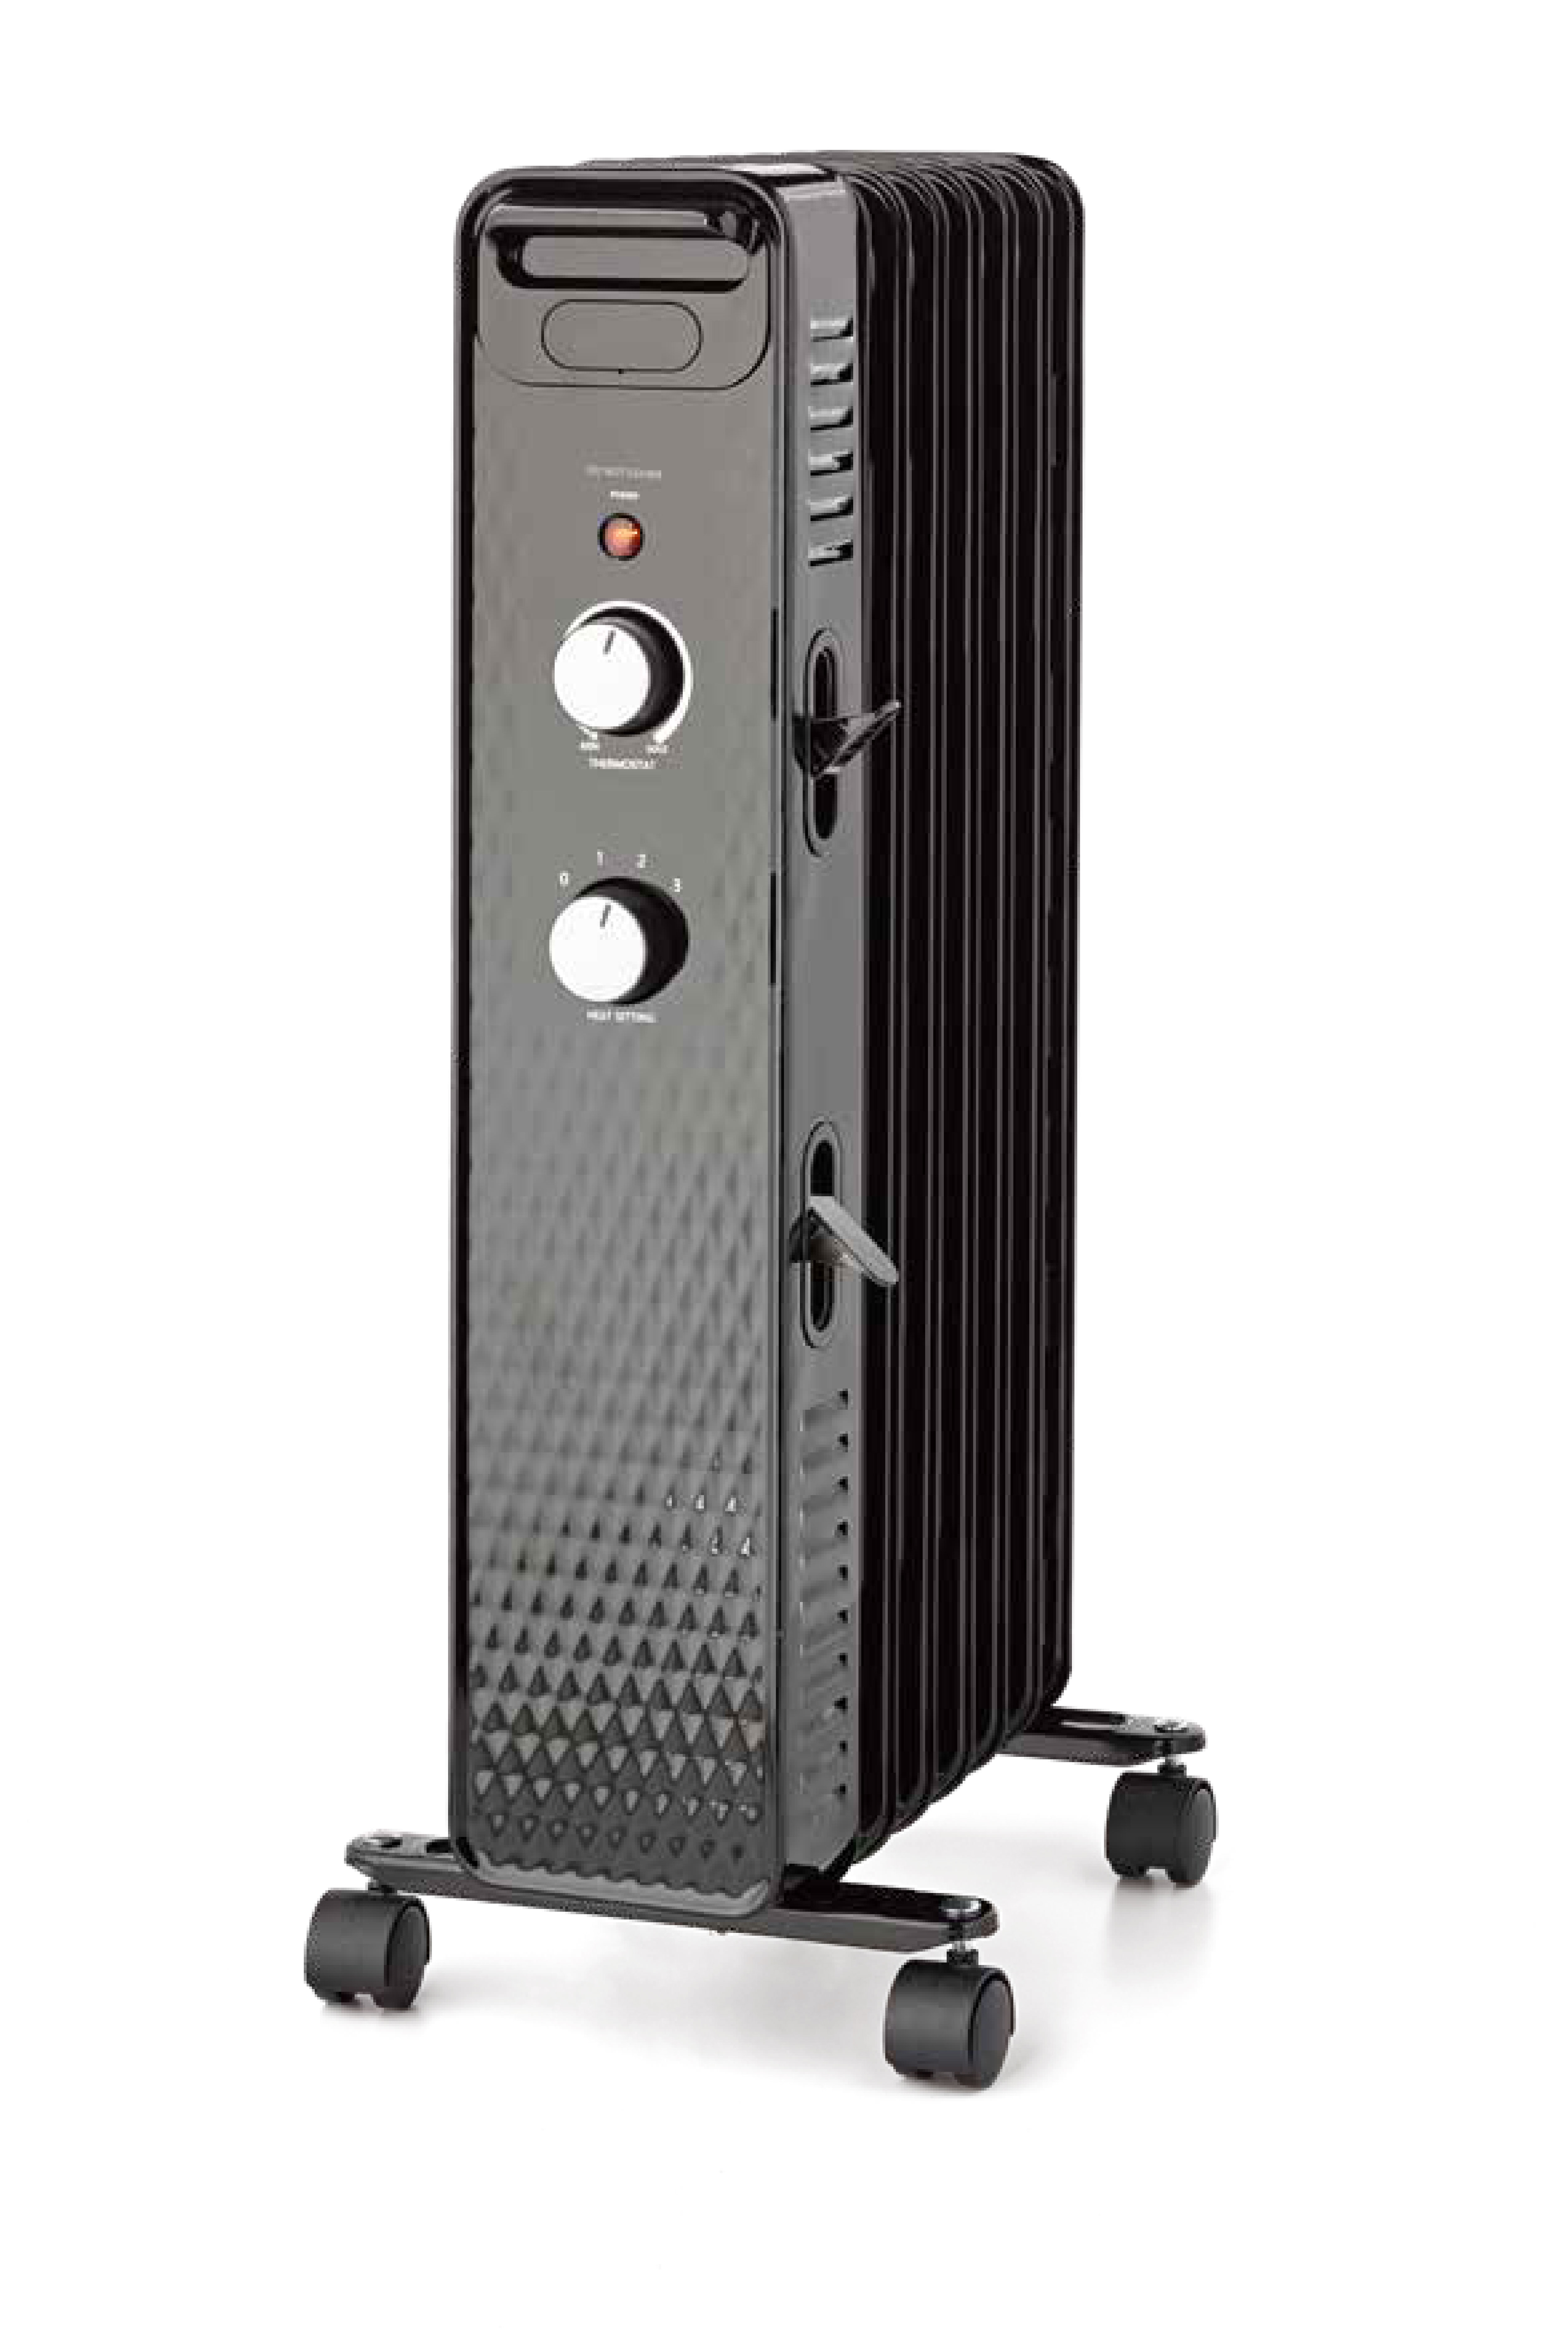 Pelonis 1500W Mechanical Oil-Filled 3-Setting Electric Radiant Heater, PSH07O2ABB, Black - image 1 of 13